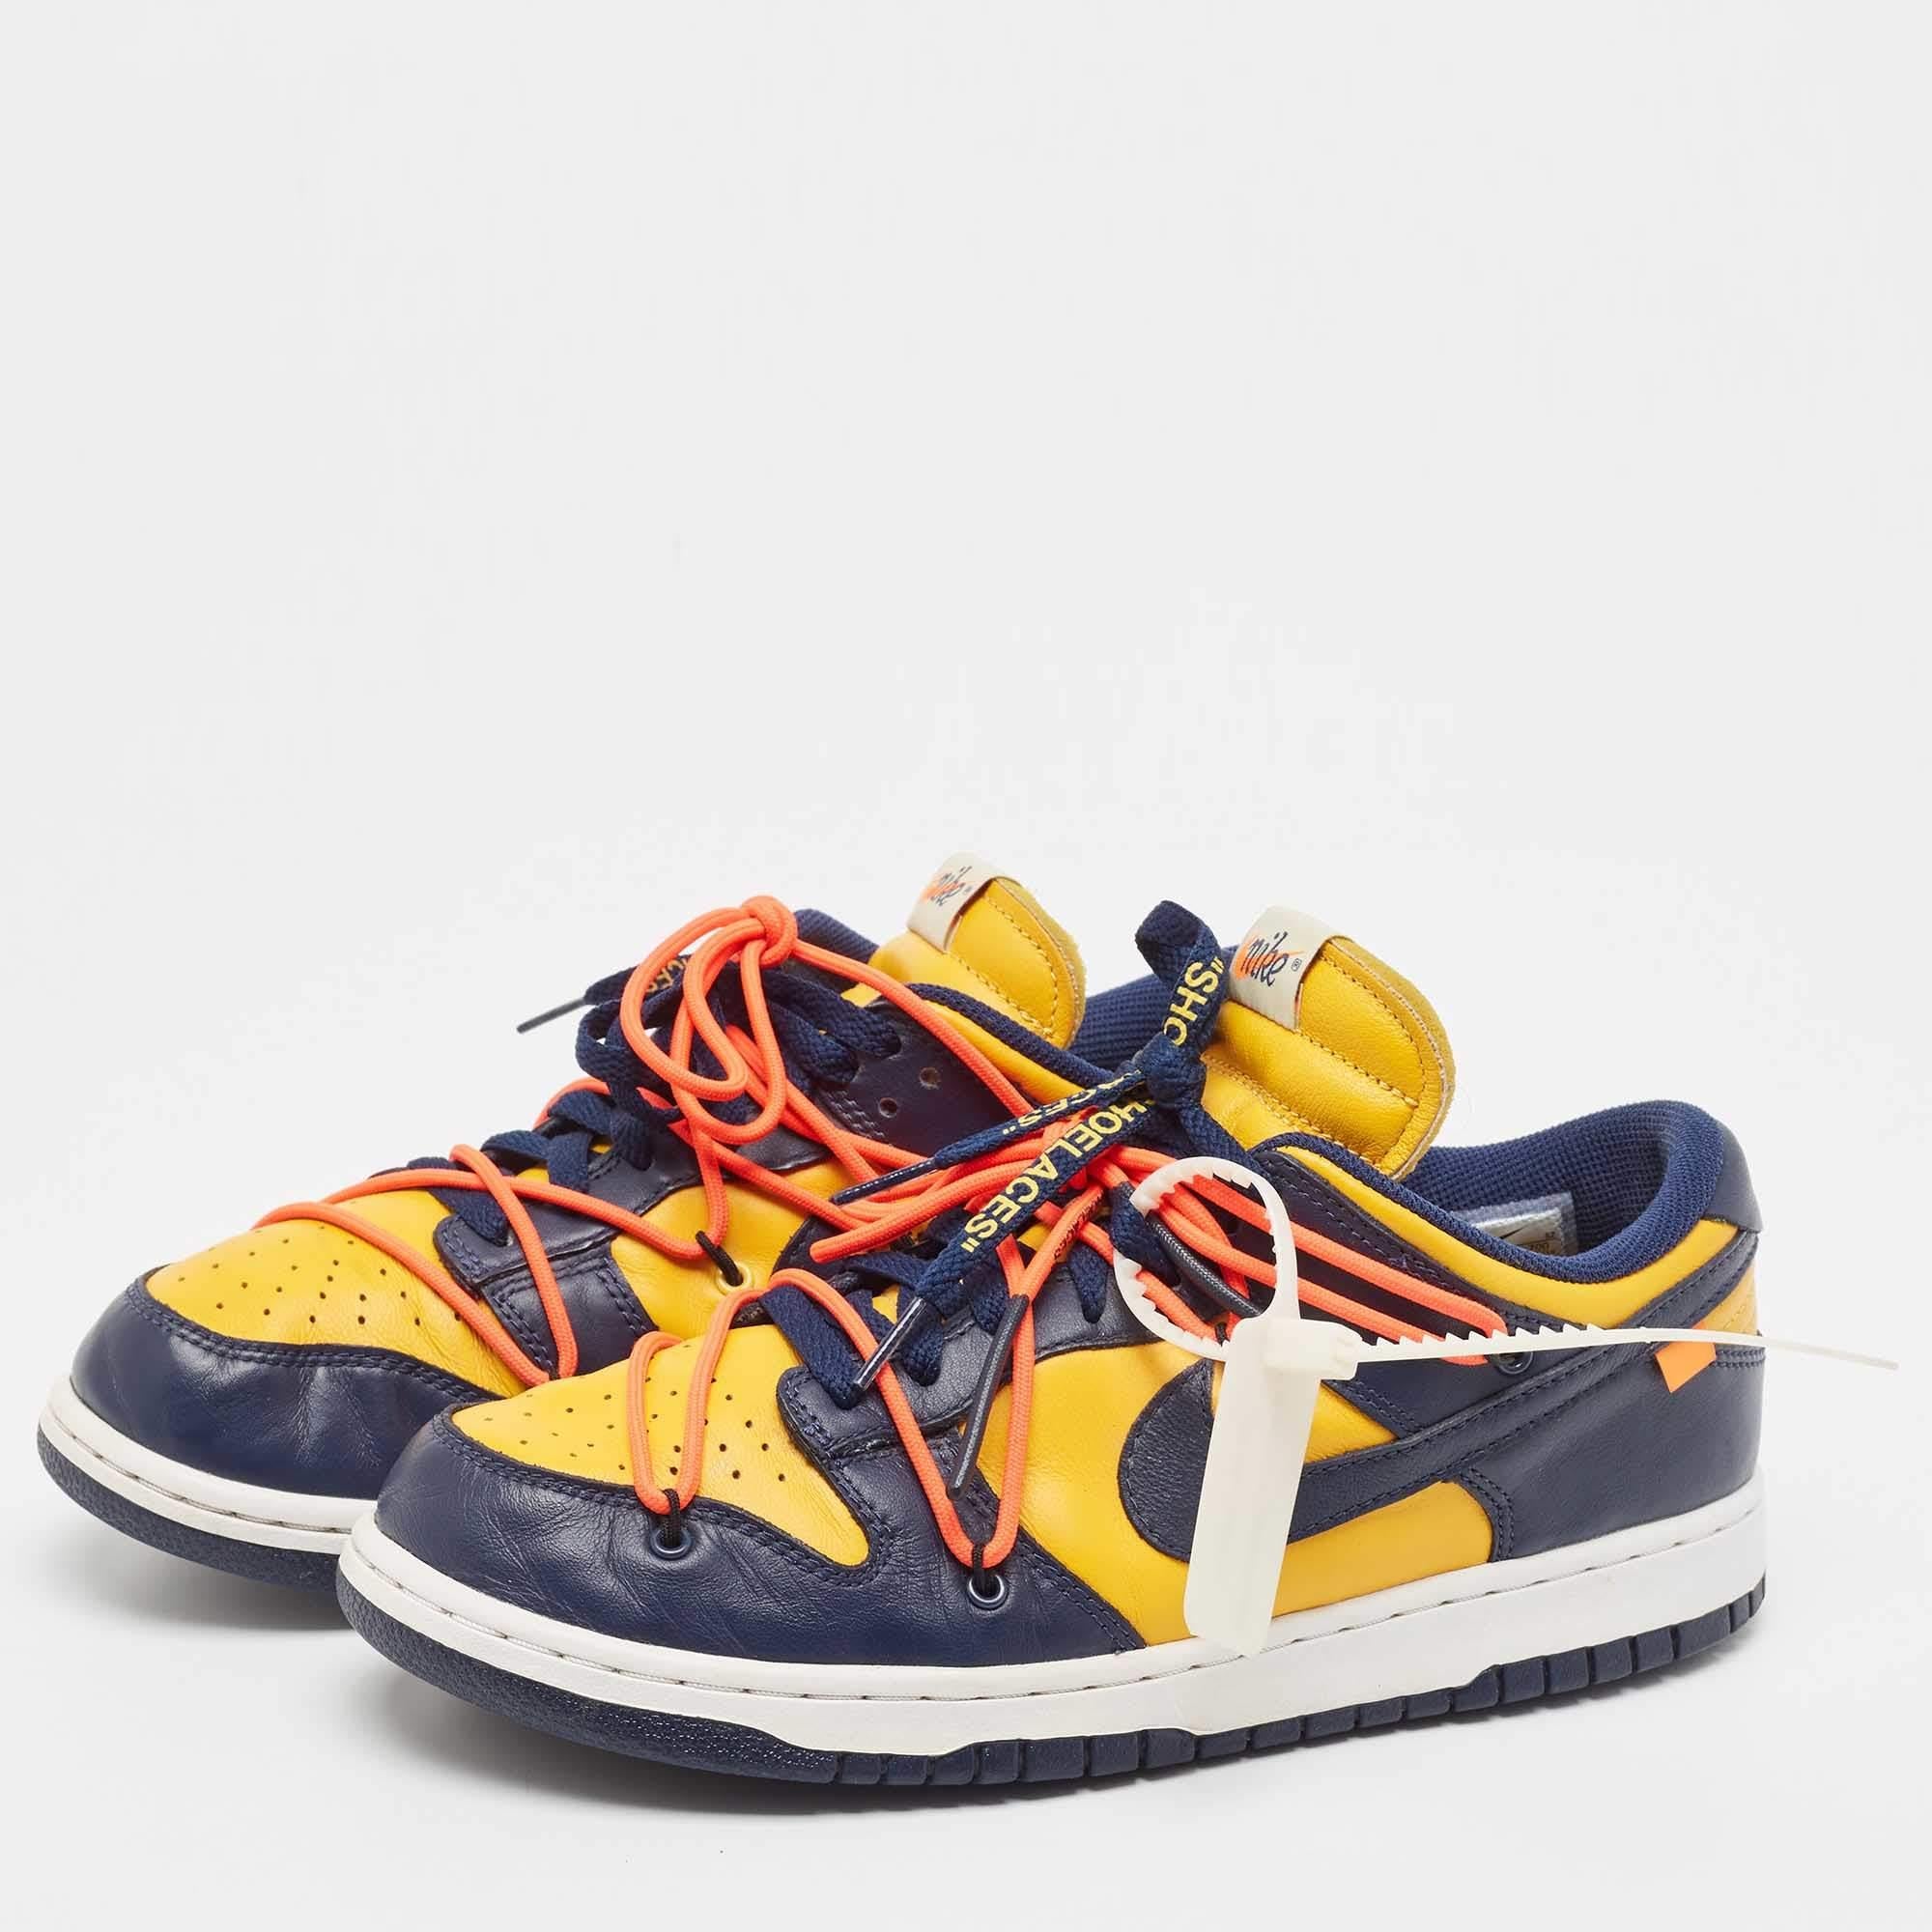 Off-White x Nike Yellow/Navy Blue Leather Michigan Sneakers Size 42.5 4